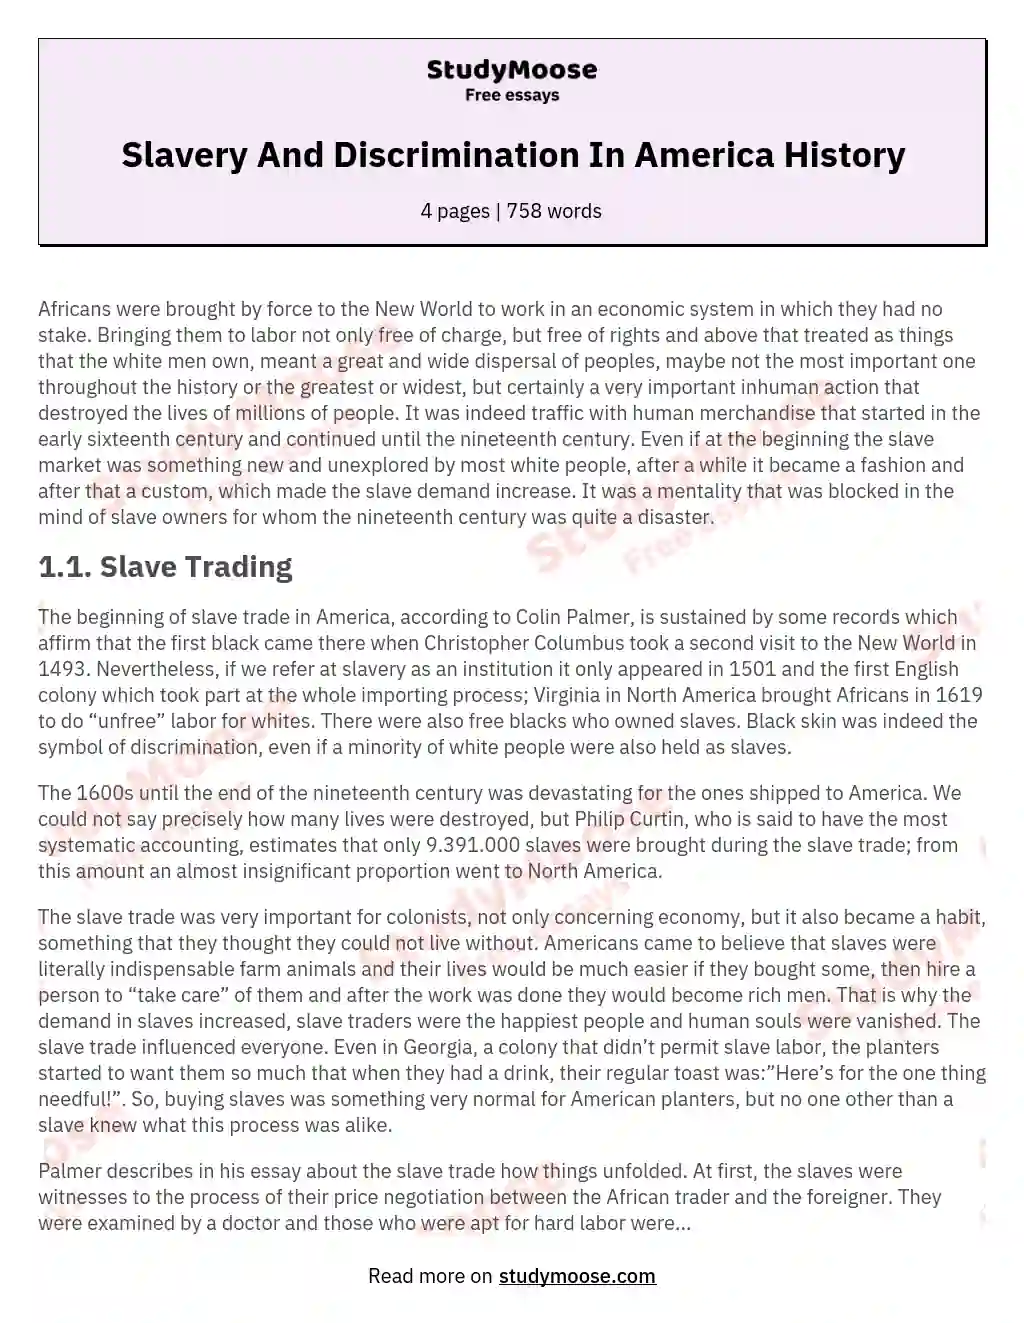 Slavery And Discrimination In America History